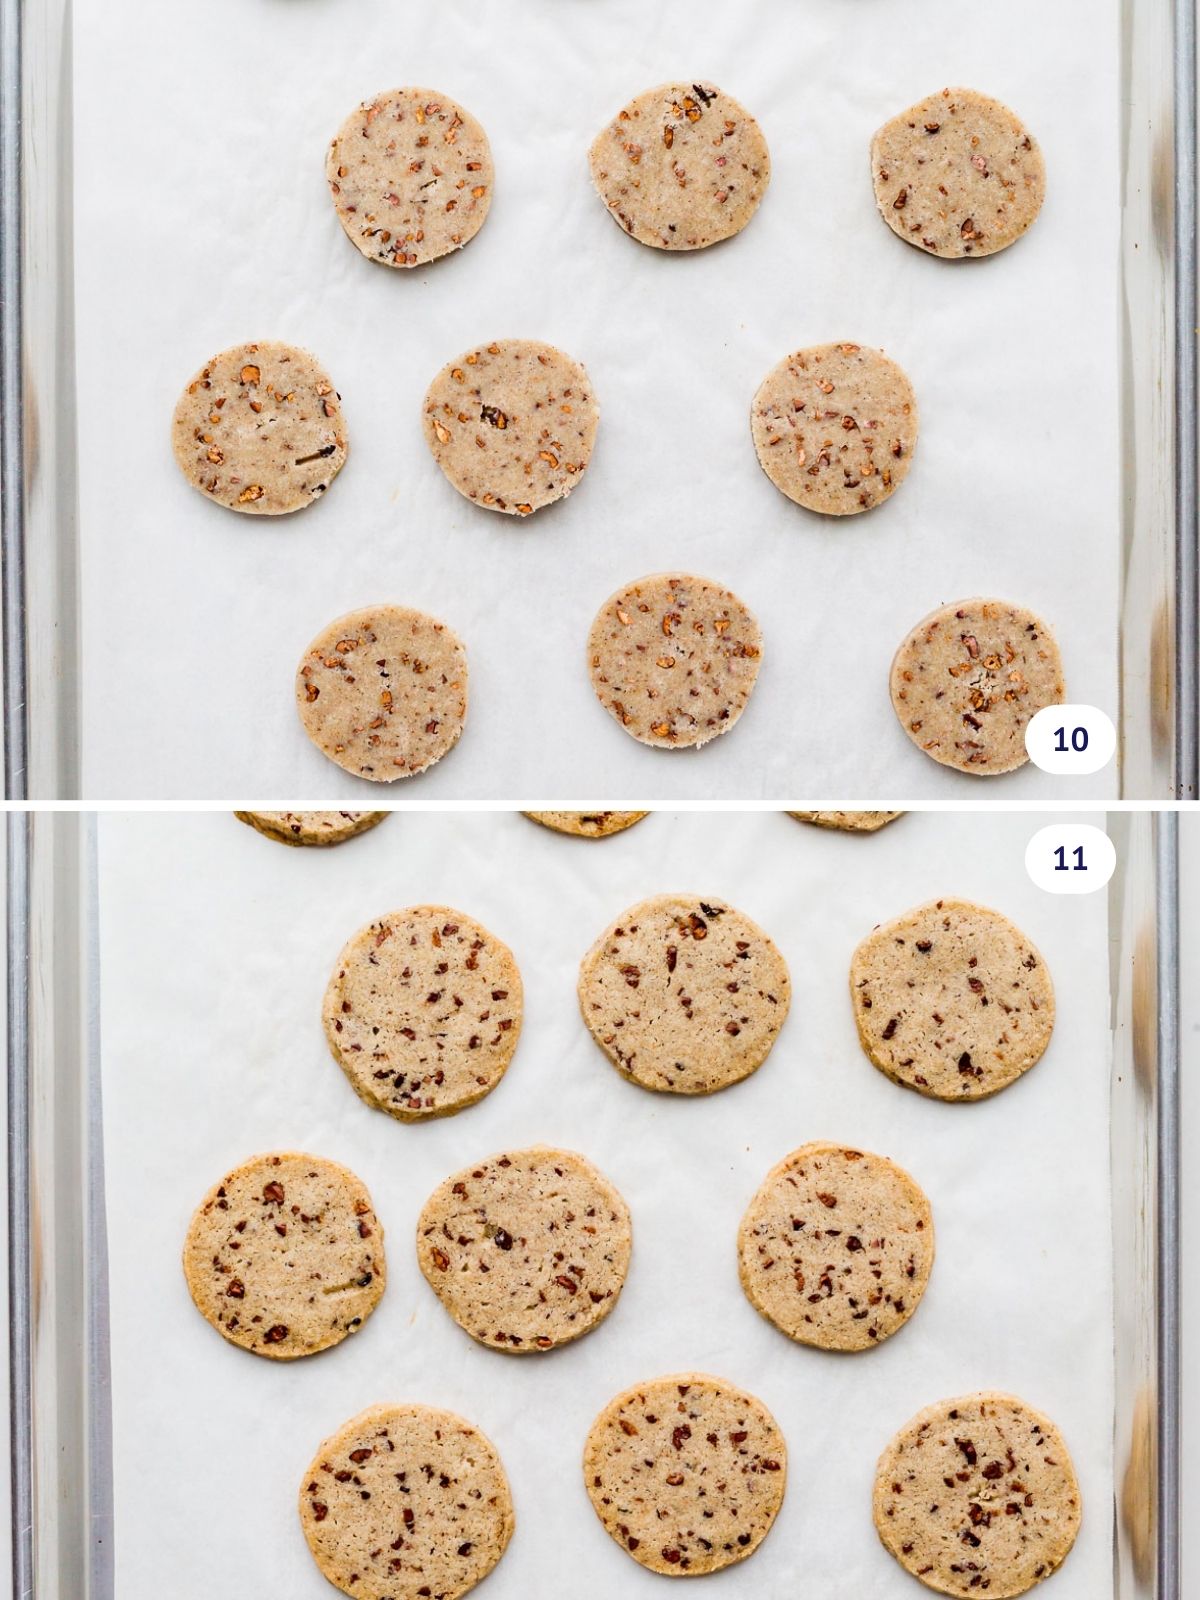 Round shortbread cookies before and after baking on a parchment paper-lined sheet pan.